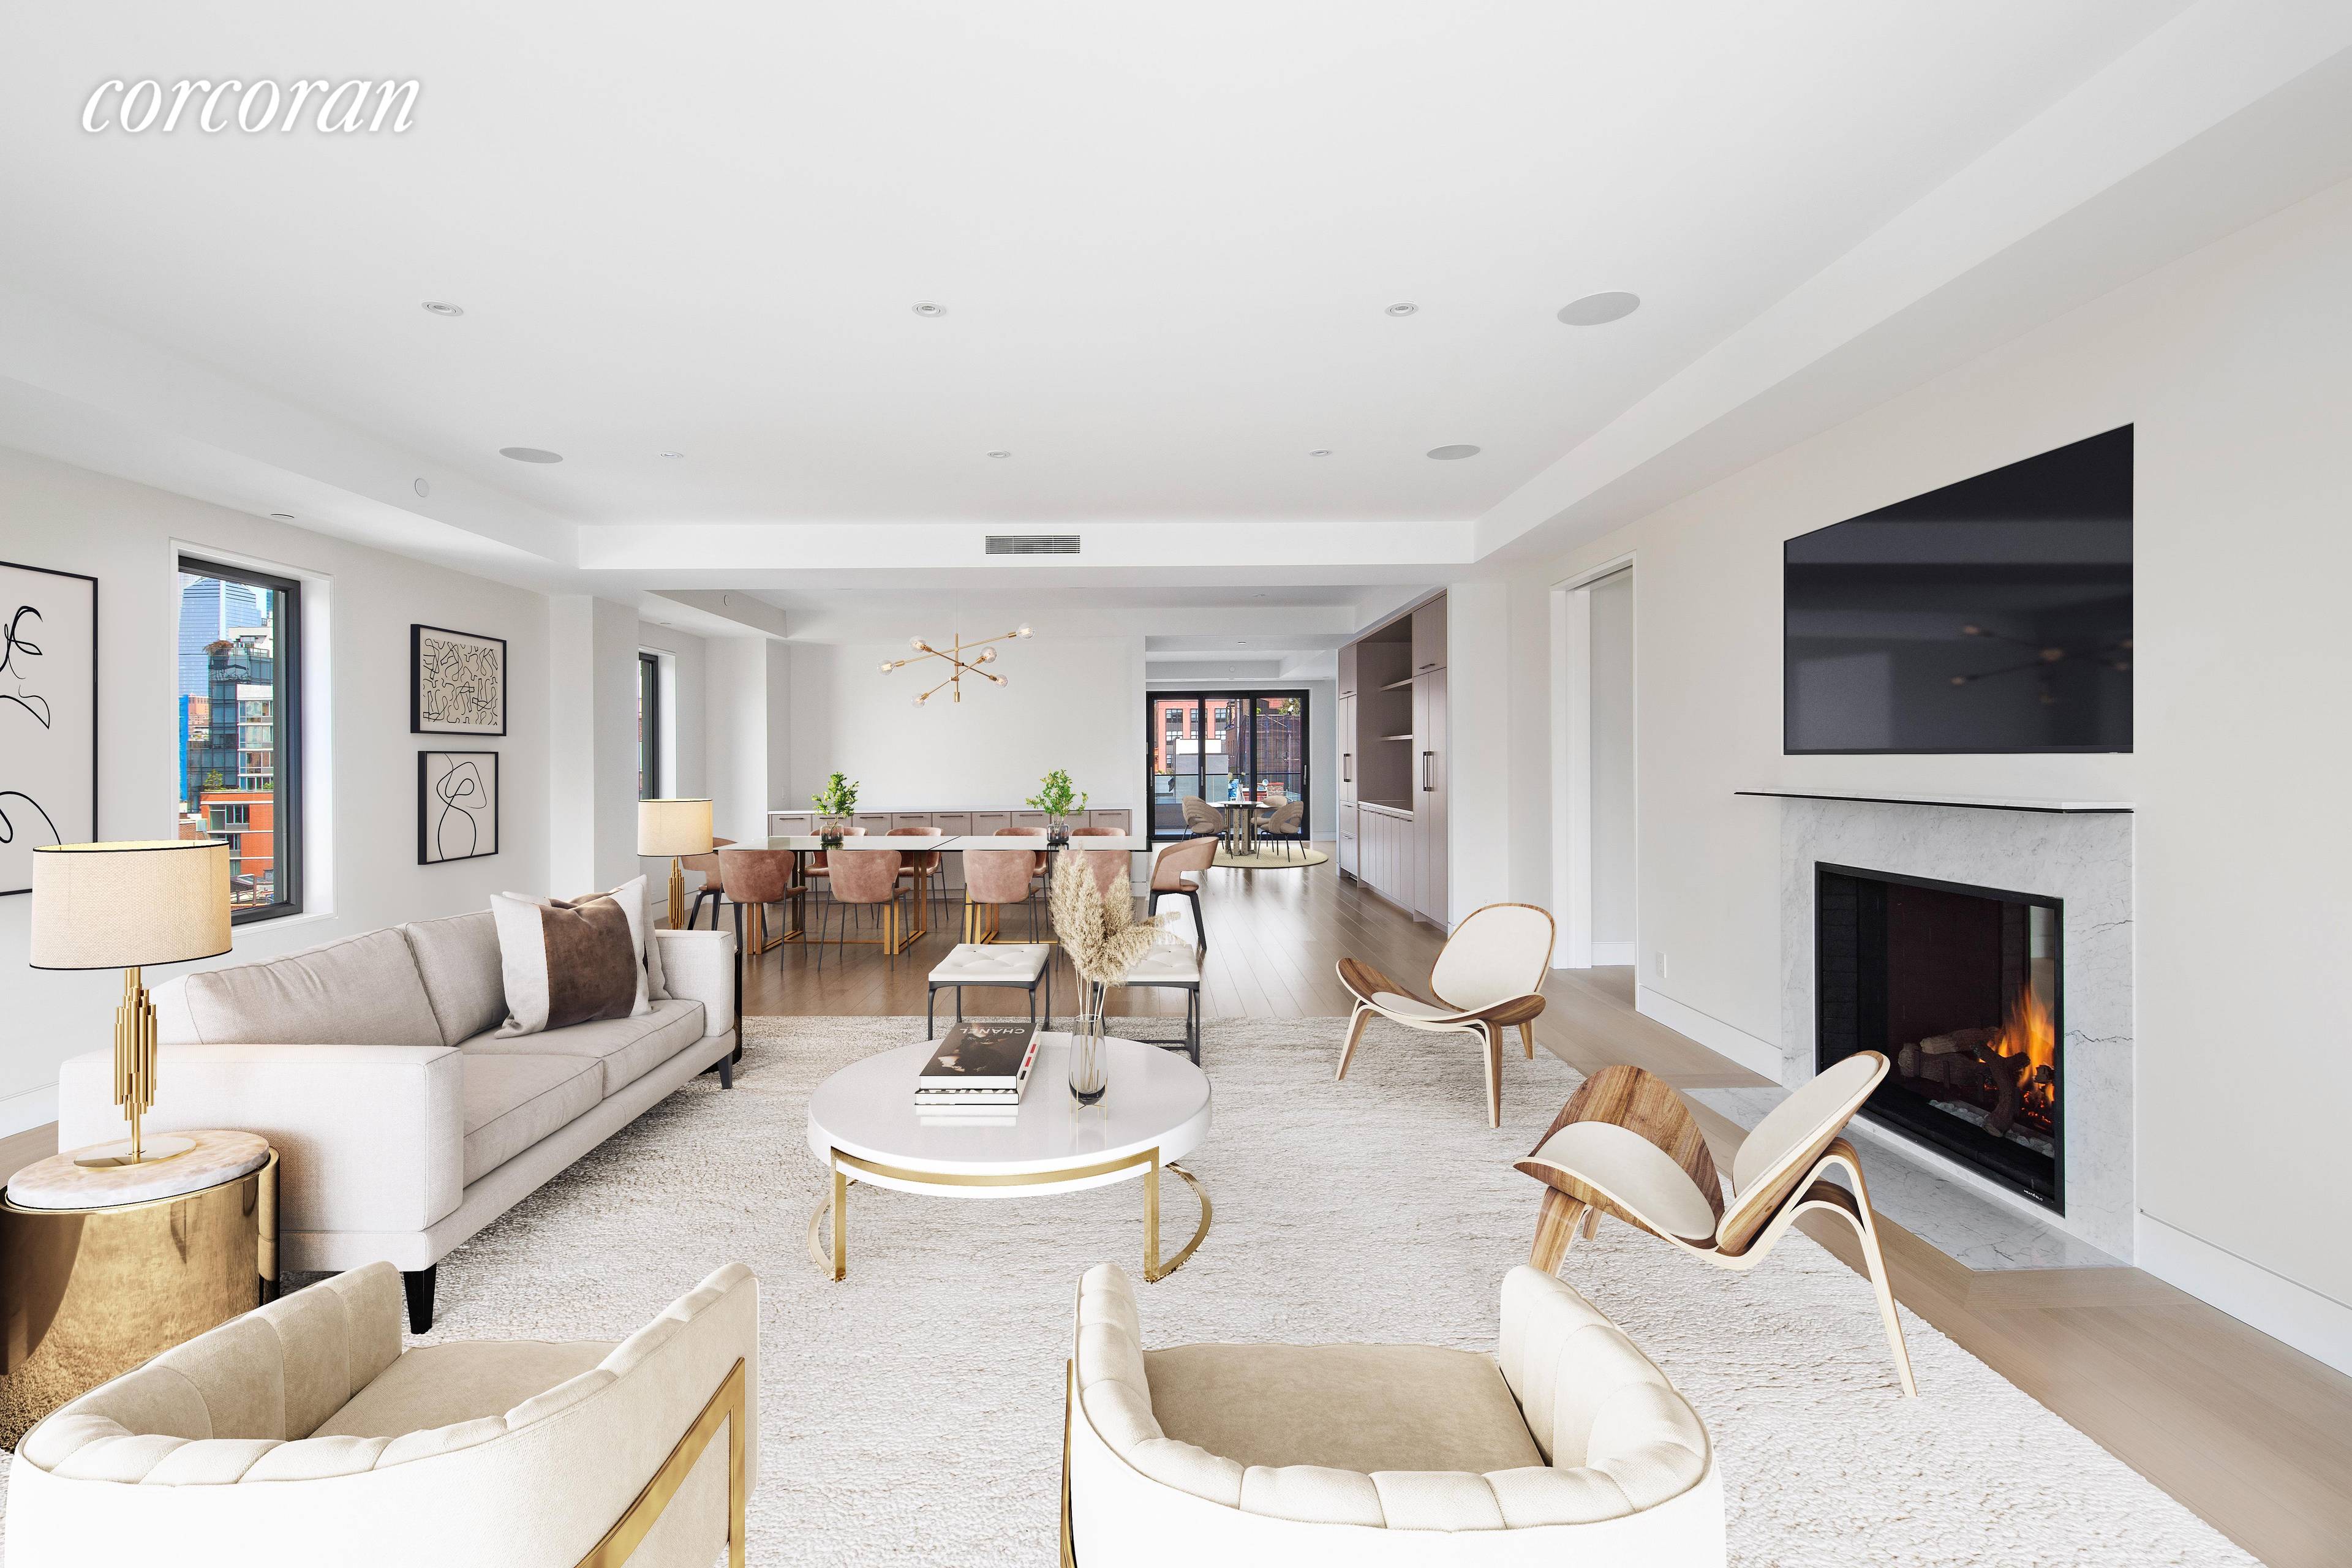 Refined living in the center of Chelsea with everything you want right now.